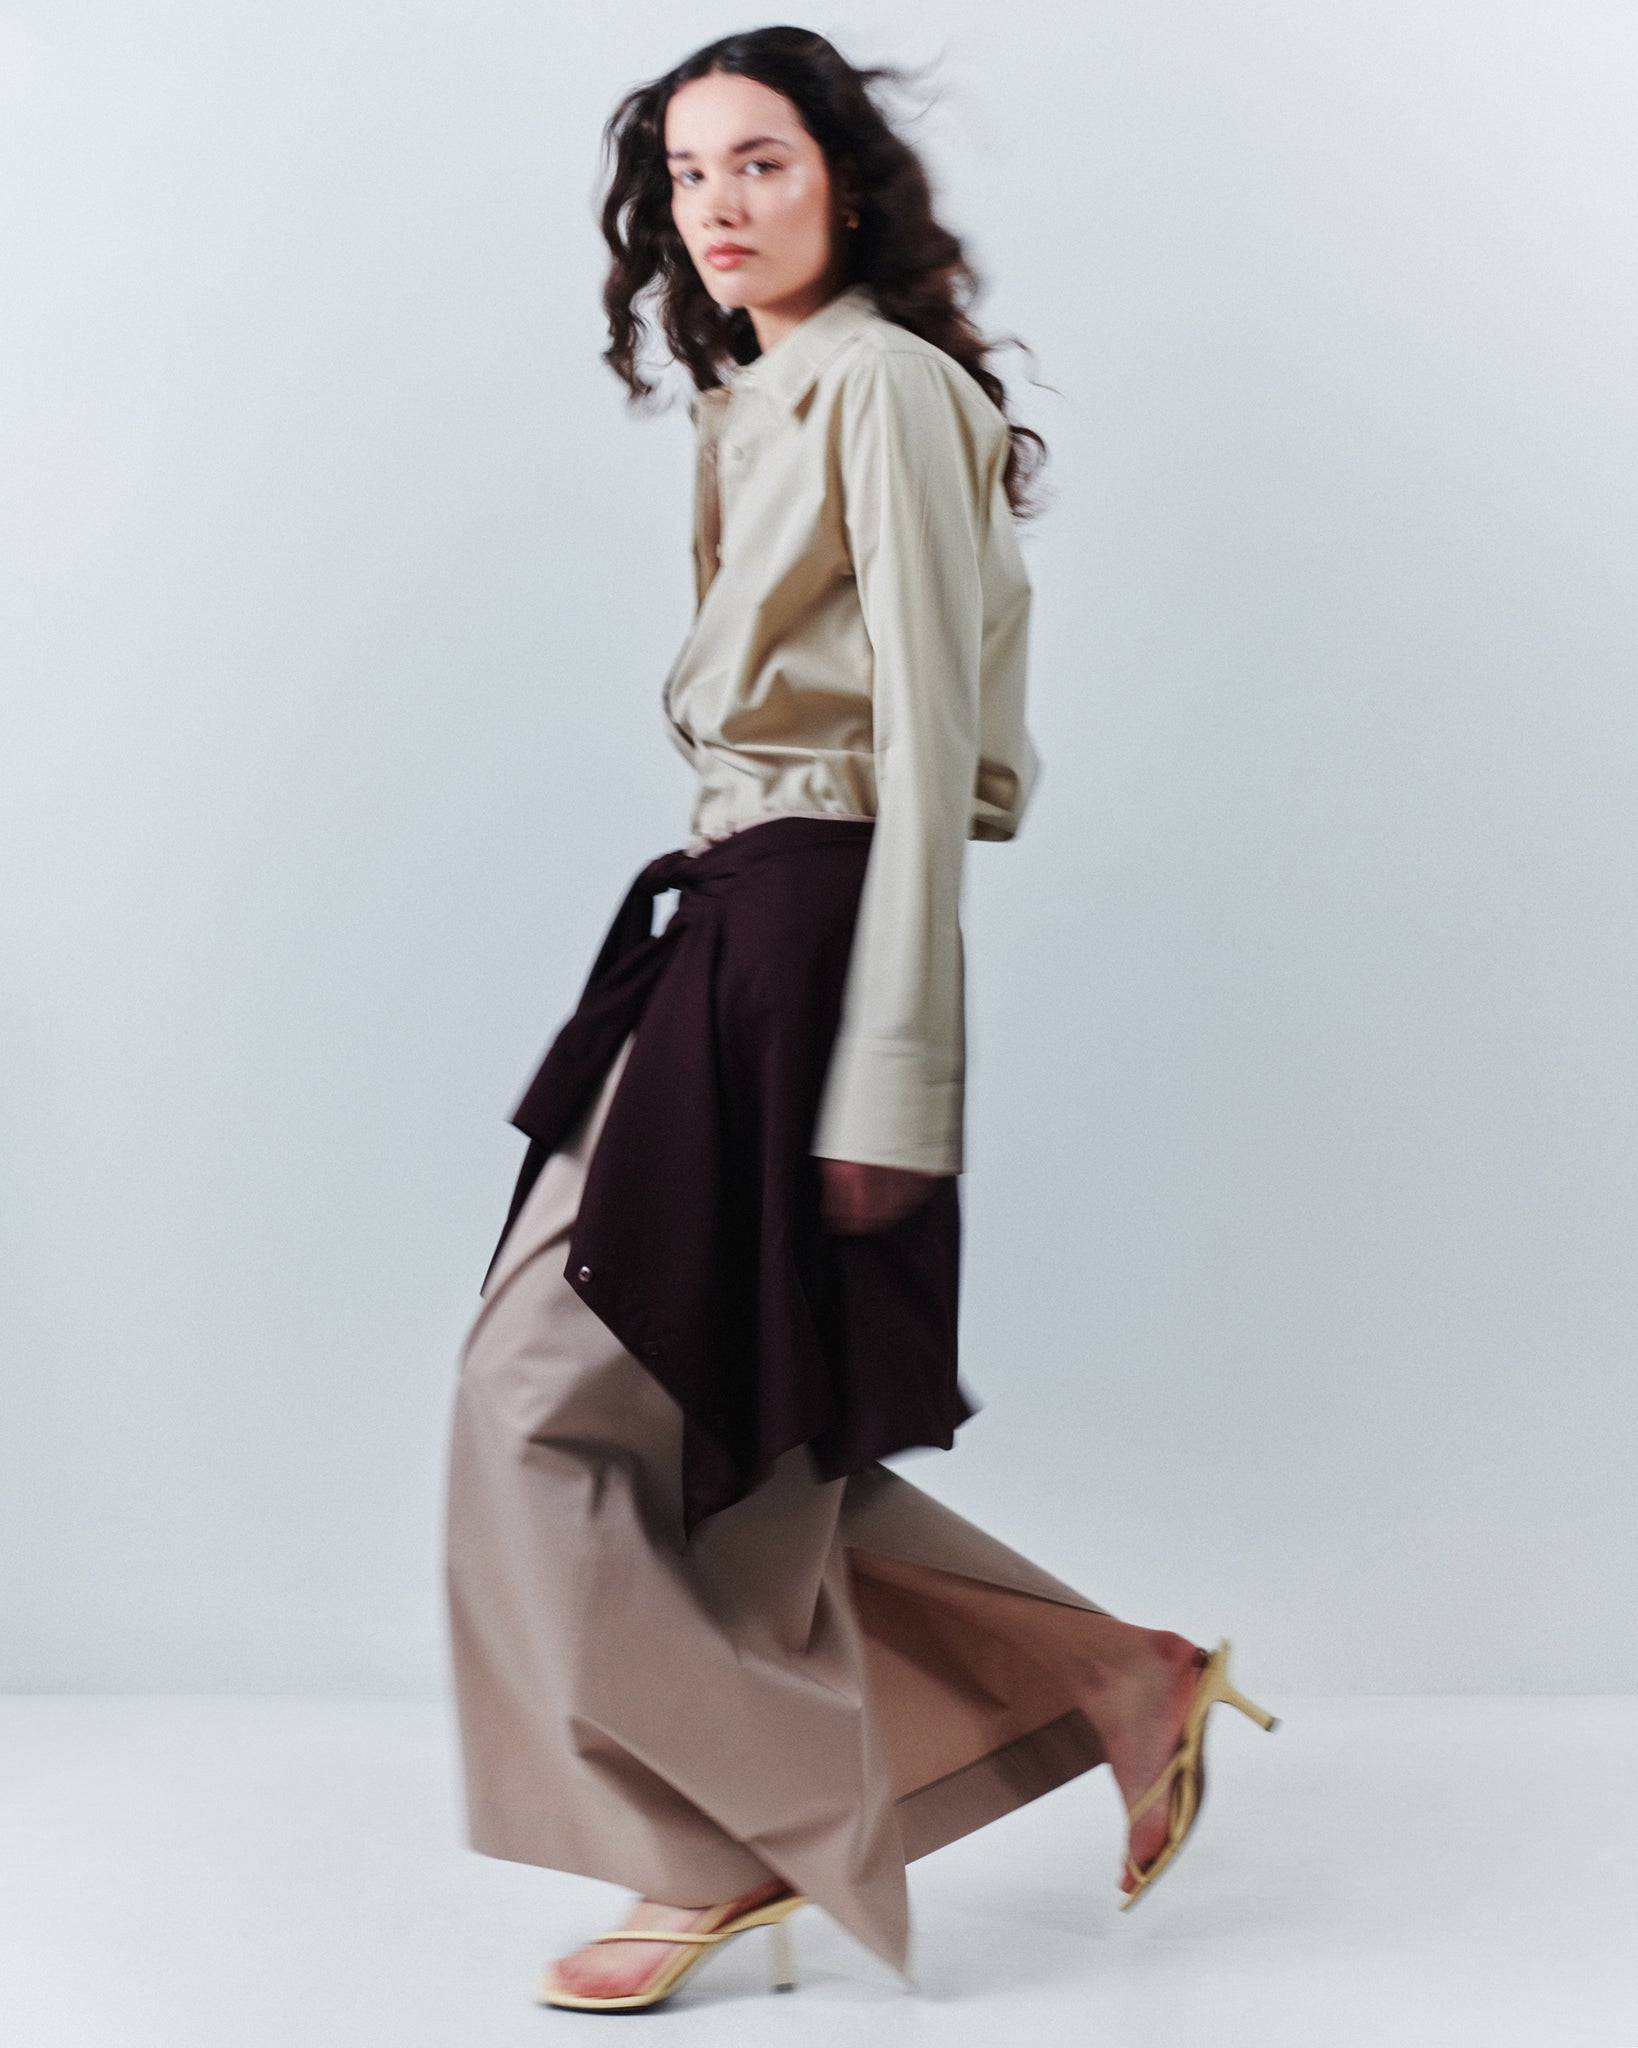 model wears Issue Twelve blush and stone coloured cotton skirt and shirt